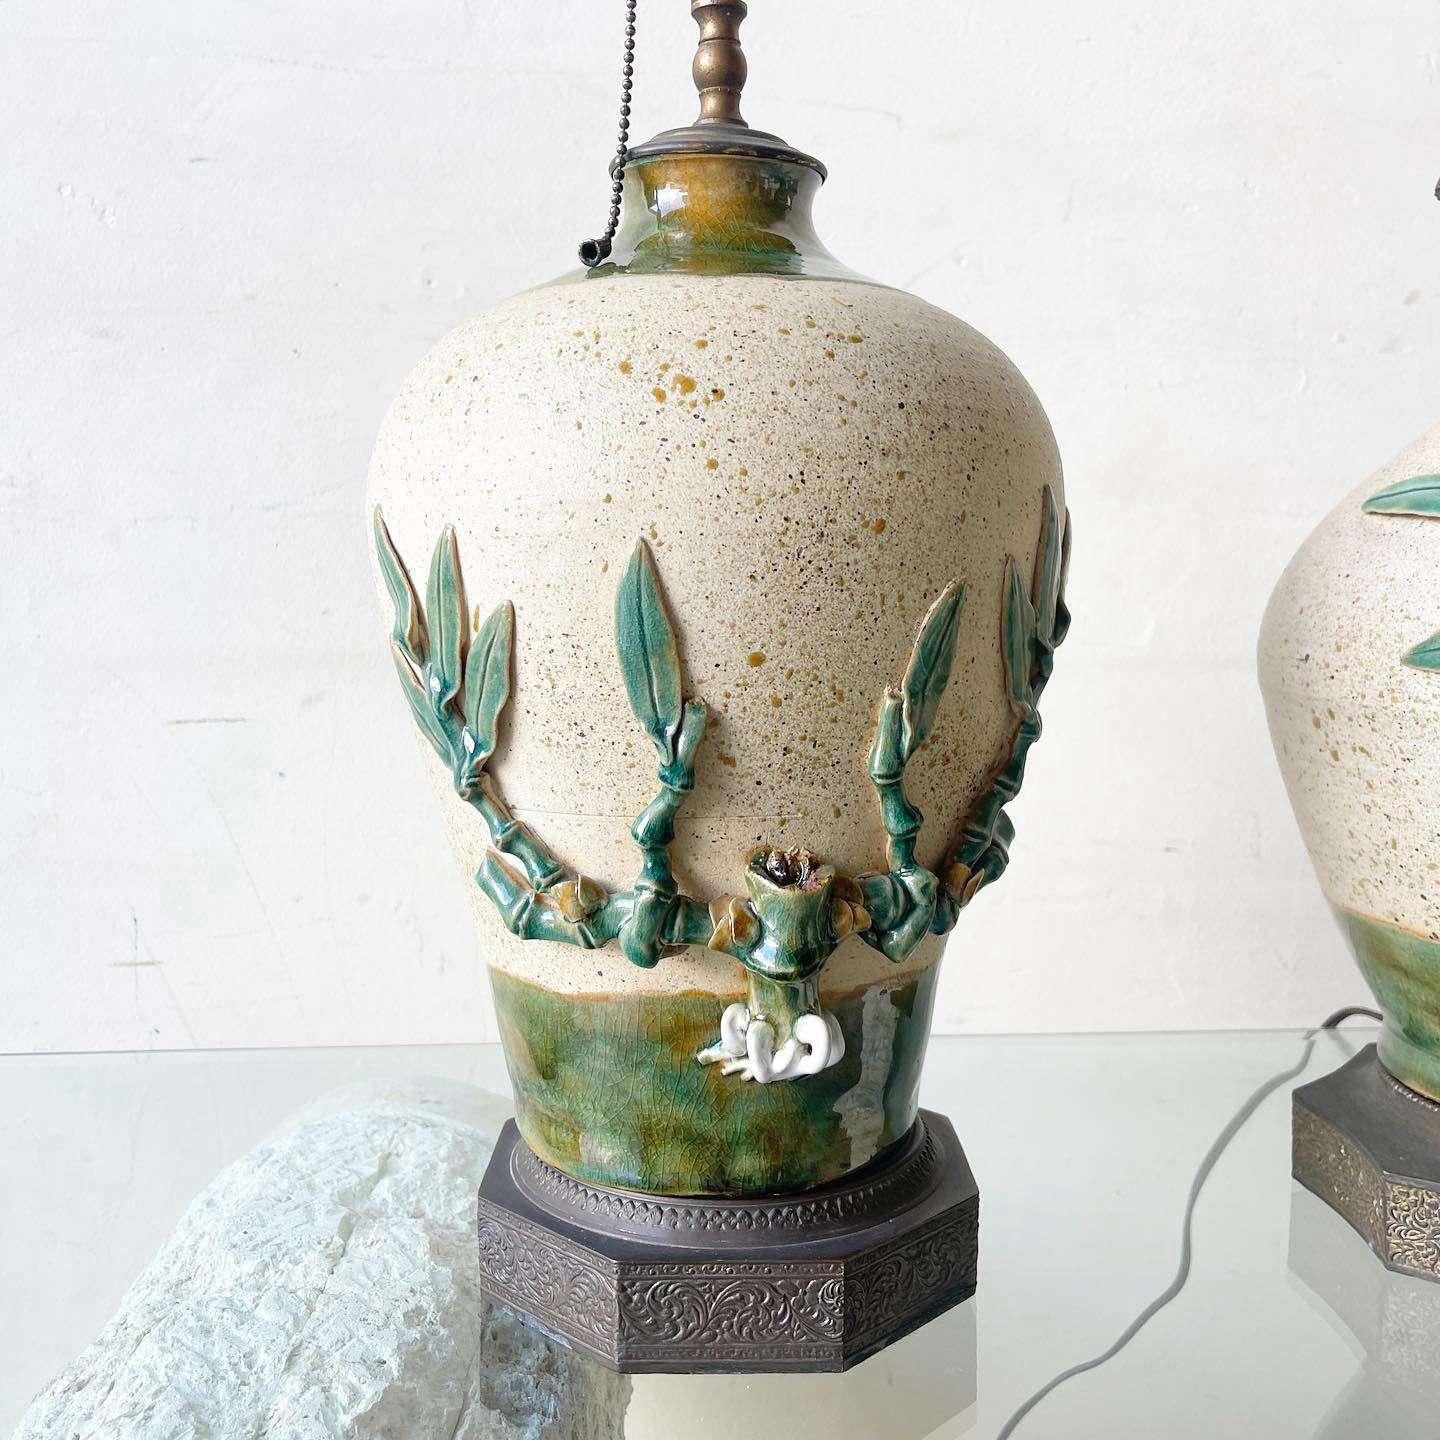 Amazing pair of vintage ceramic table lamps with brass brasses and tops. Each features a hand painted and sculpted bamboo plant growing around the sides. One of the lamps displays a bird.
